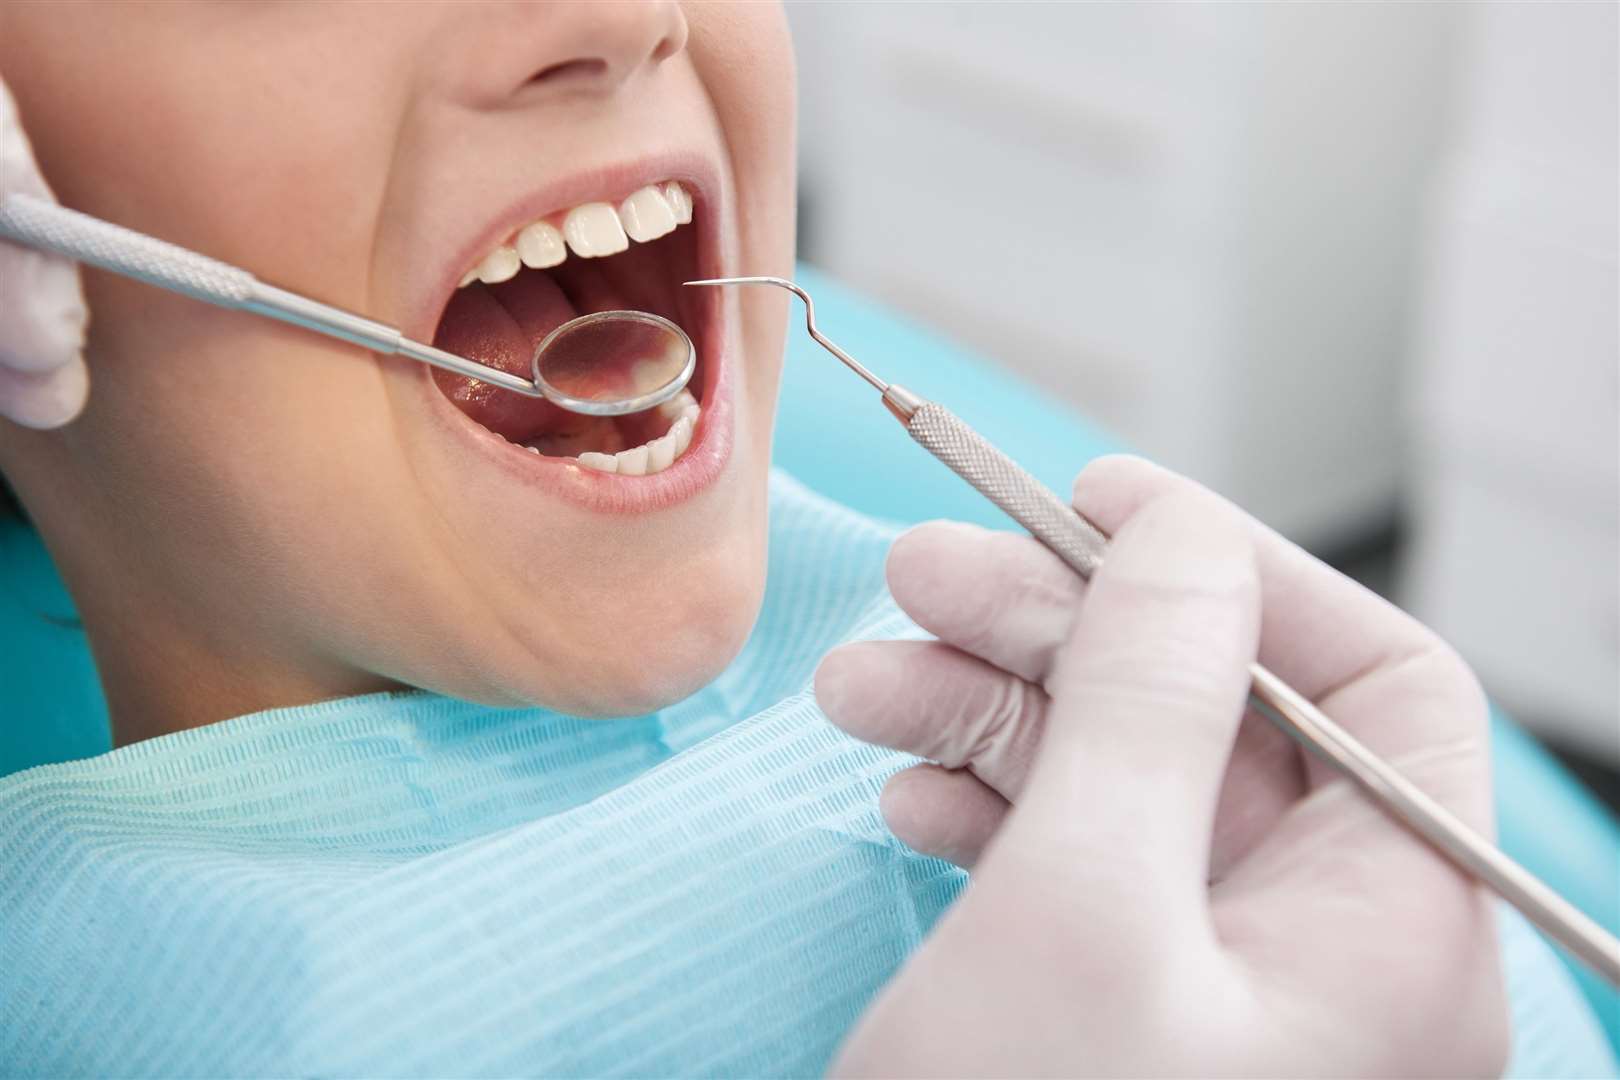 Your trip to the dentist will be significantly different